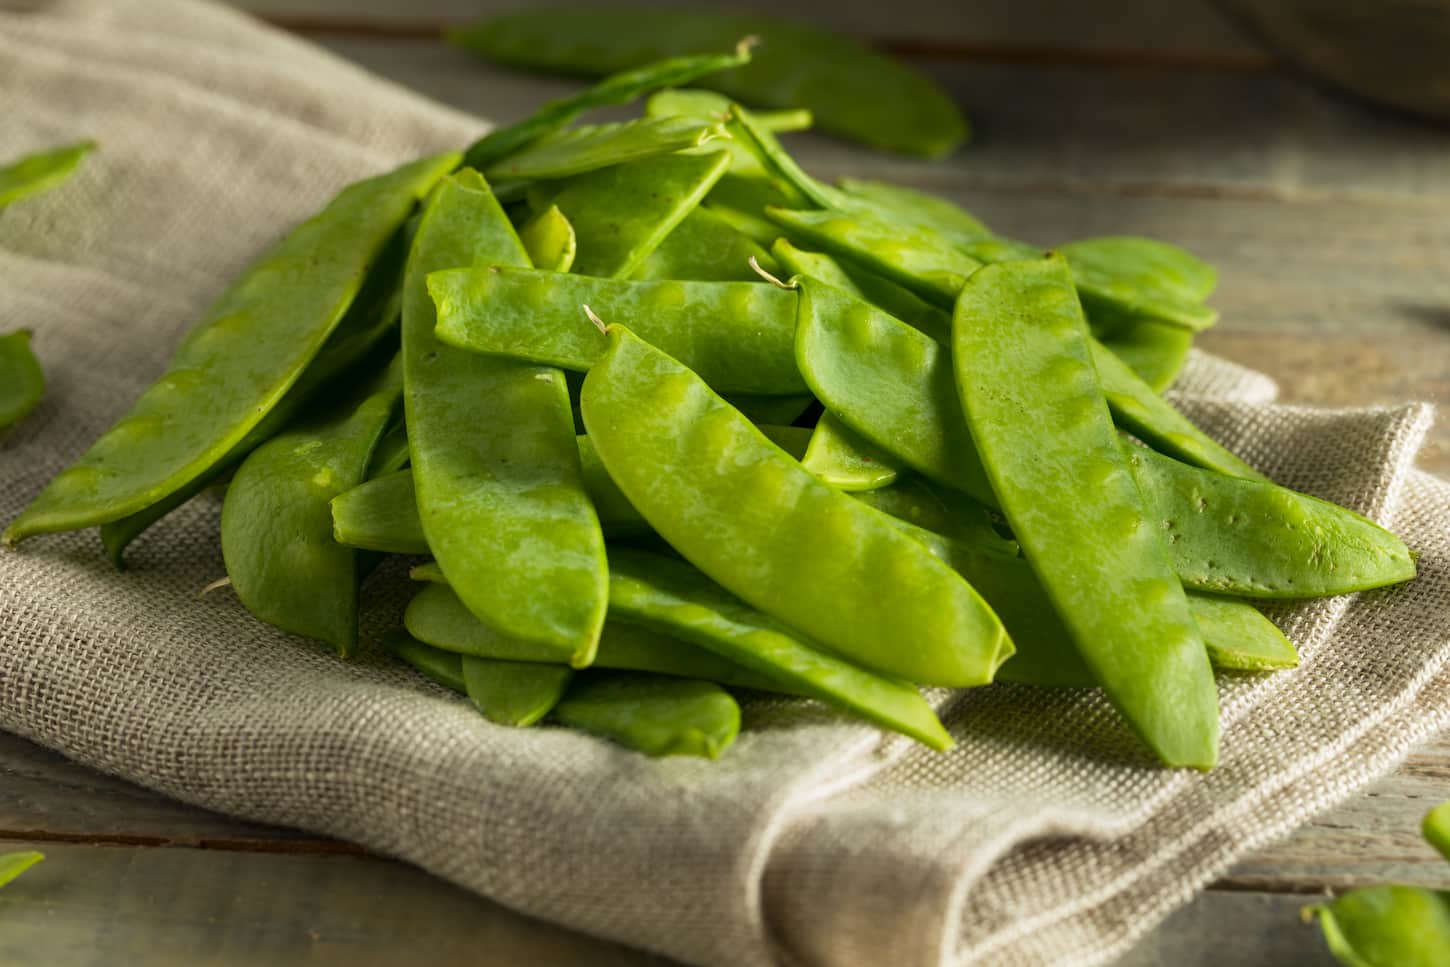 Are All Peas Mangetout? Definition and How to Tell